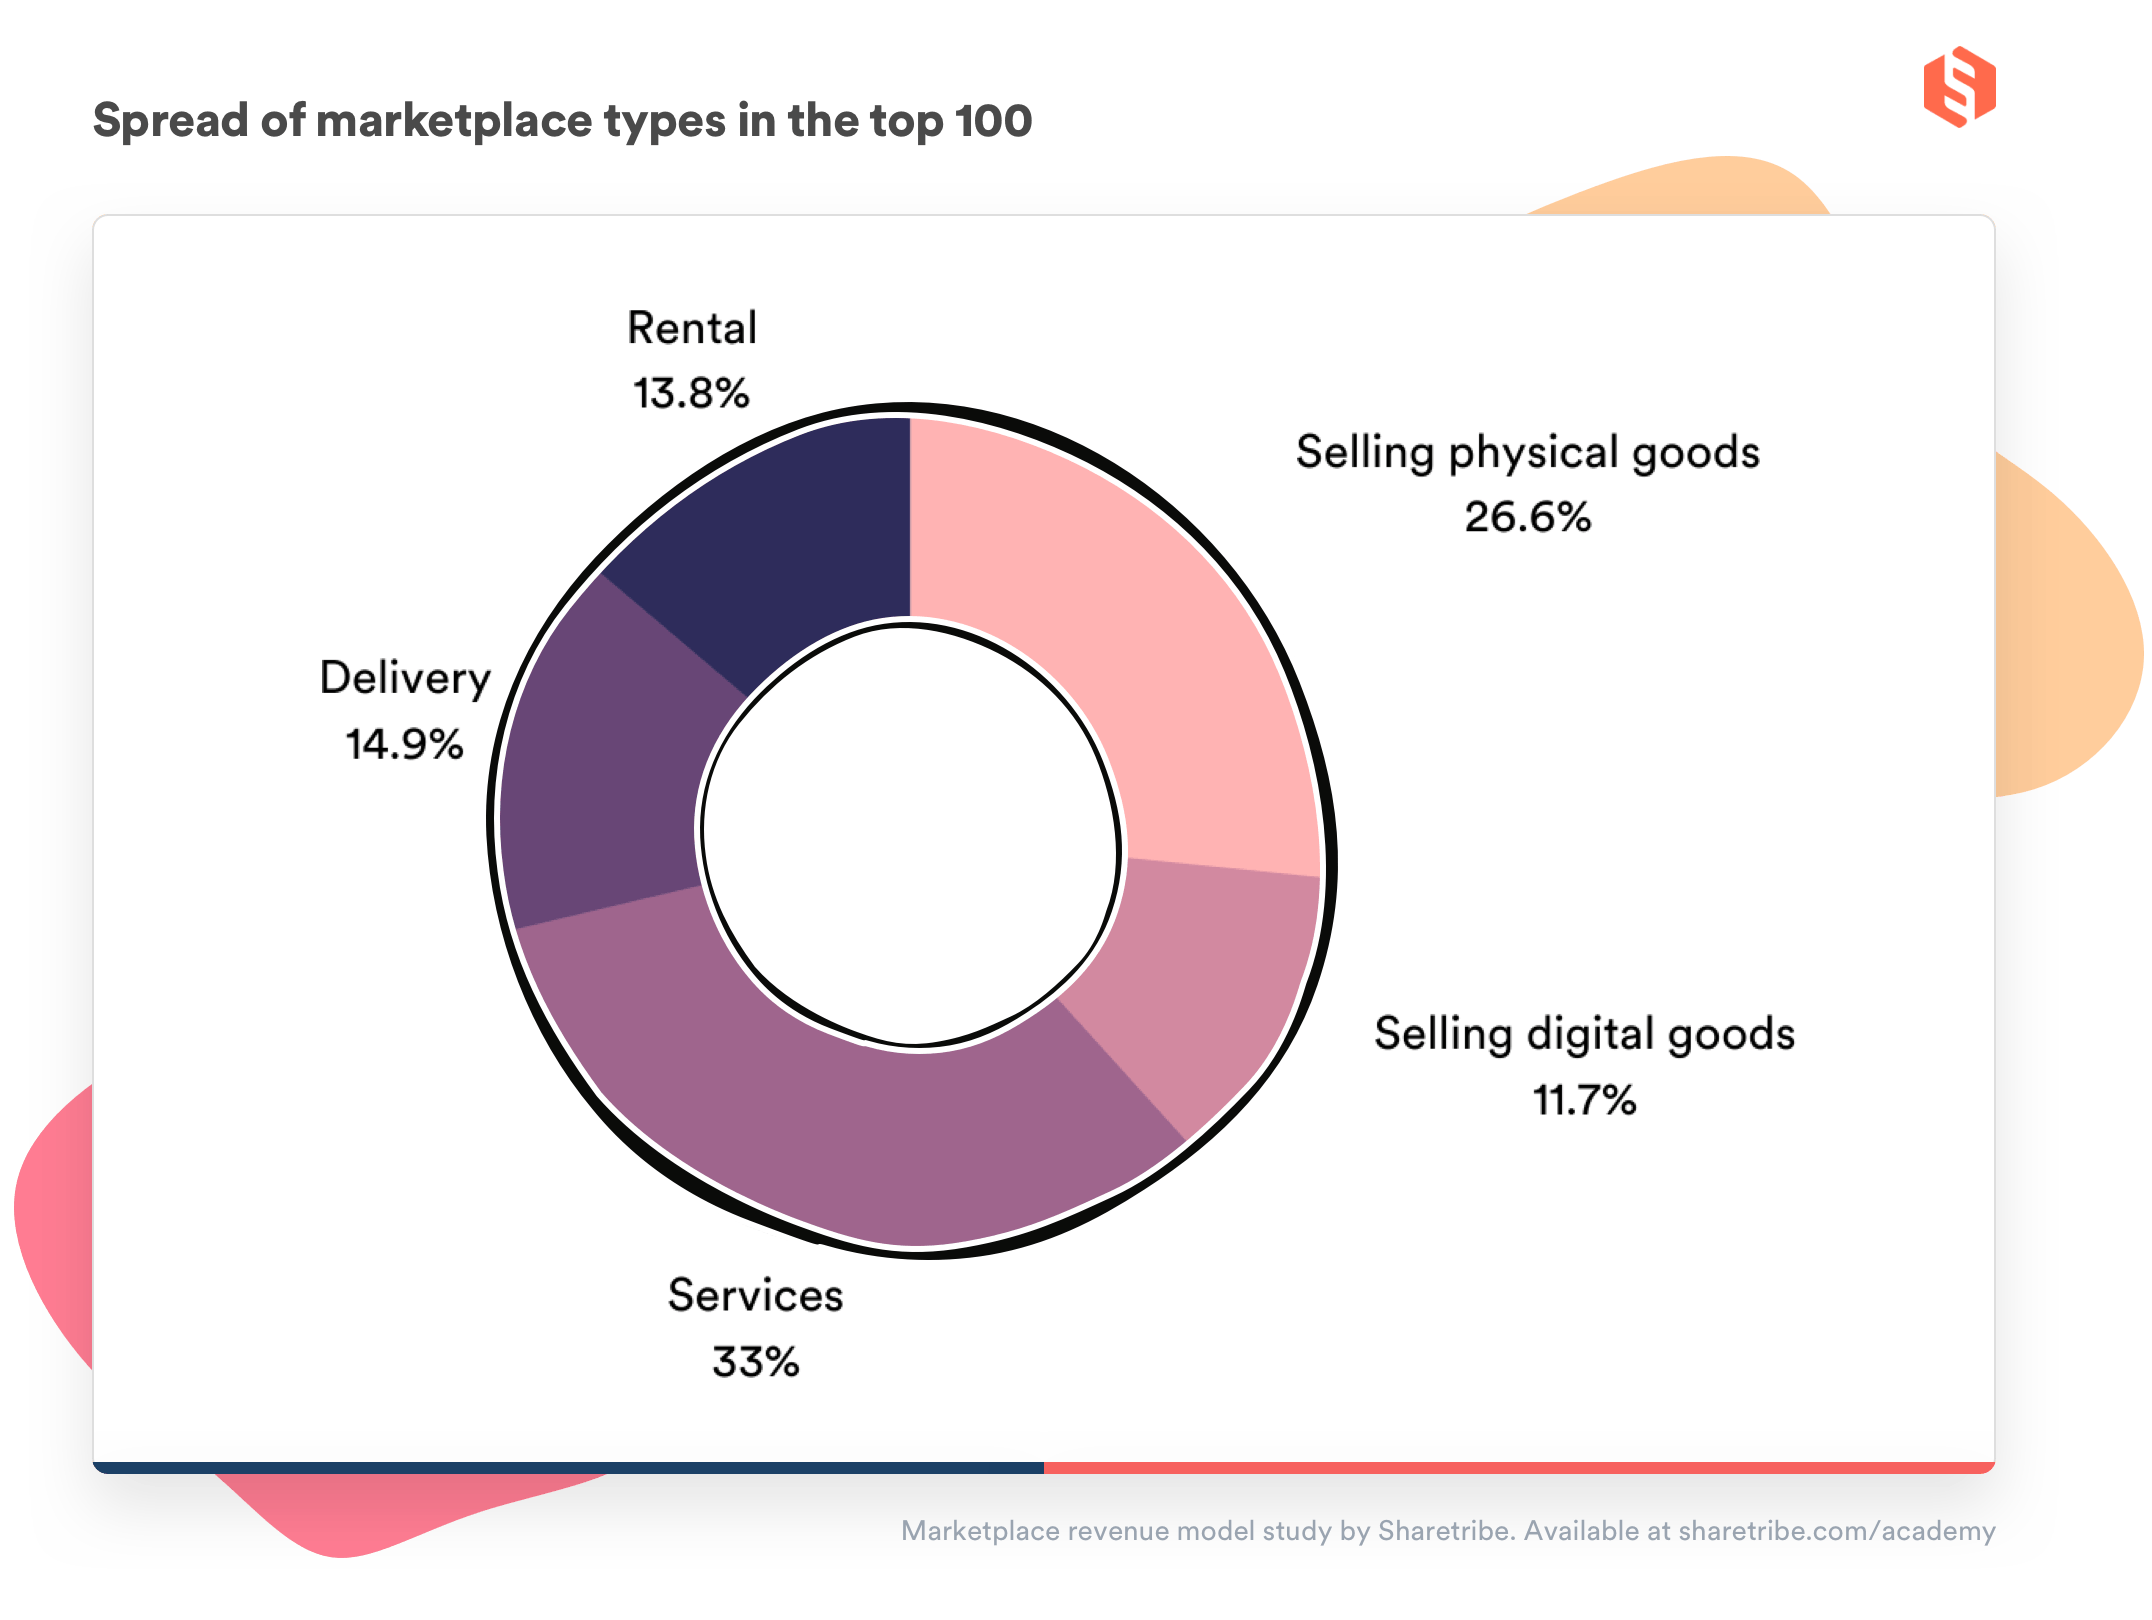 A donut chart of the percentages of different marketplace types in the top 100